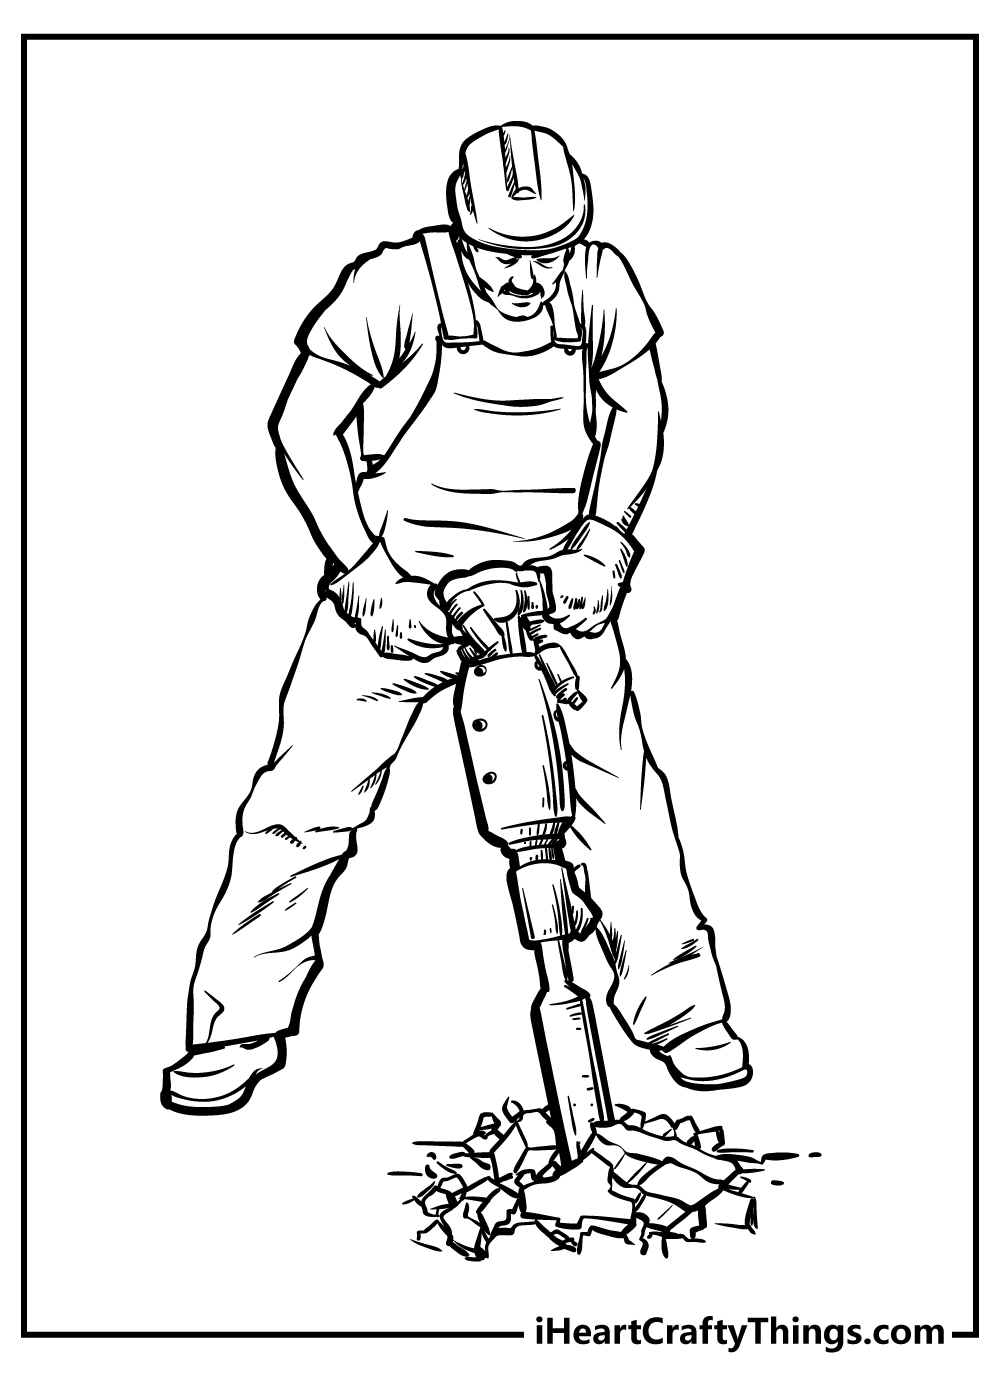 Construction Coloring Pages free pdf download